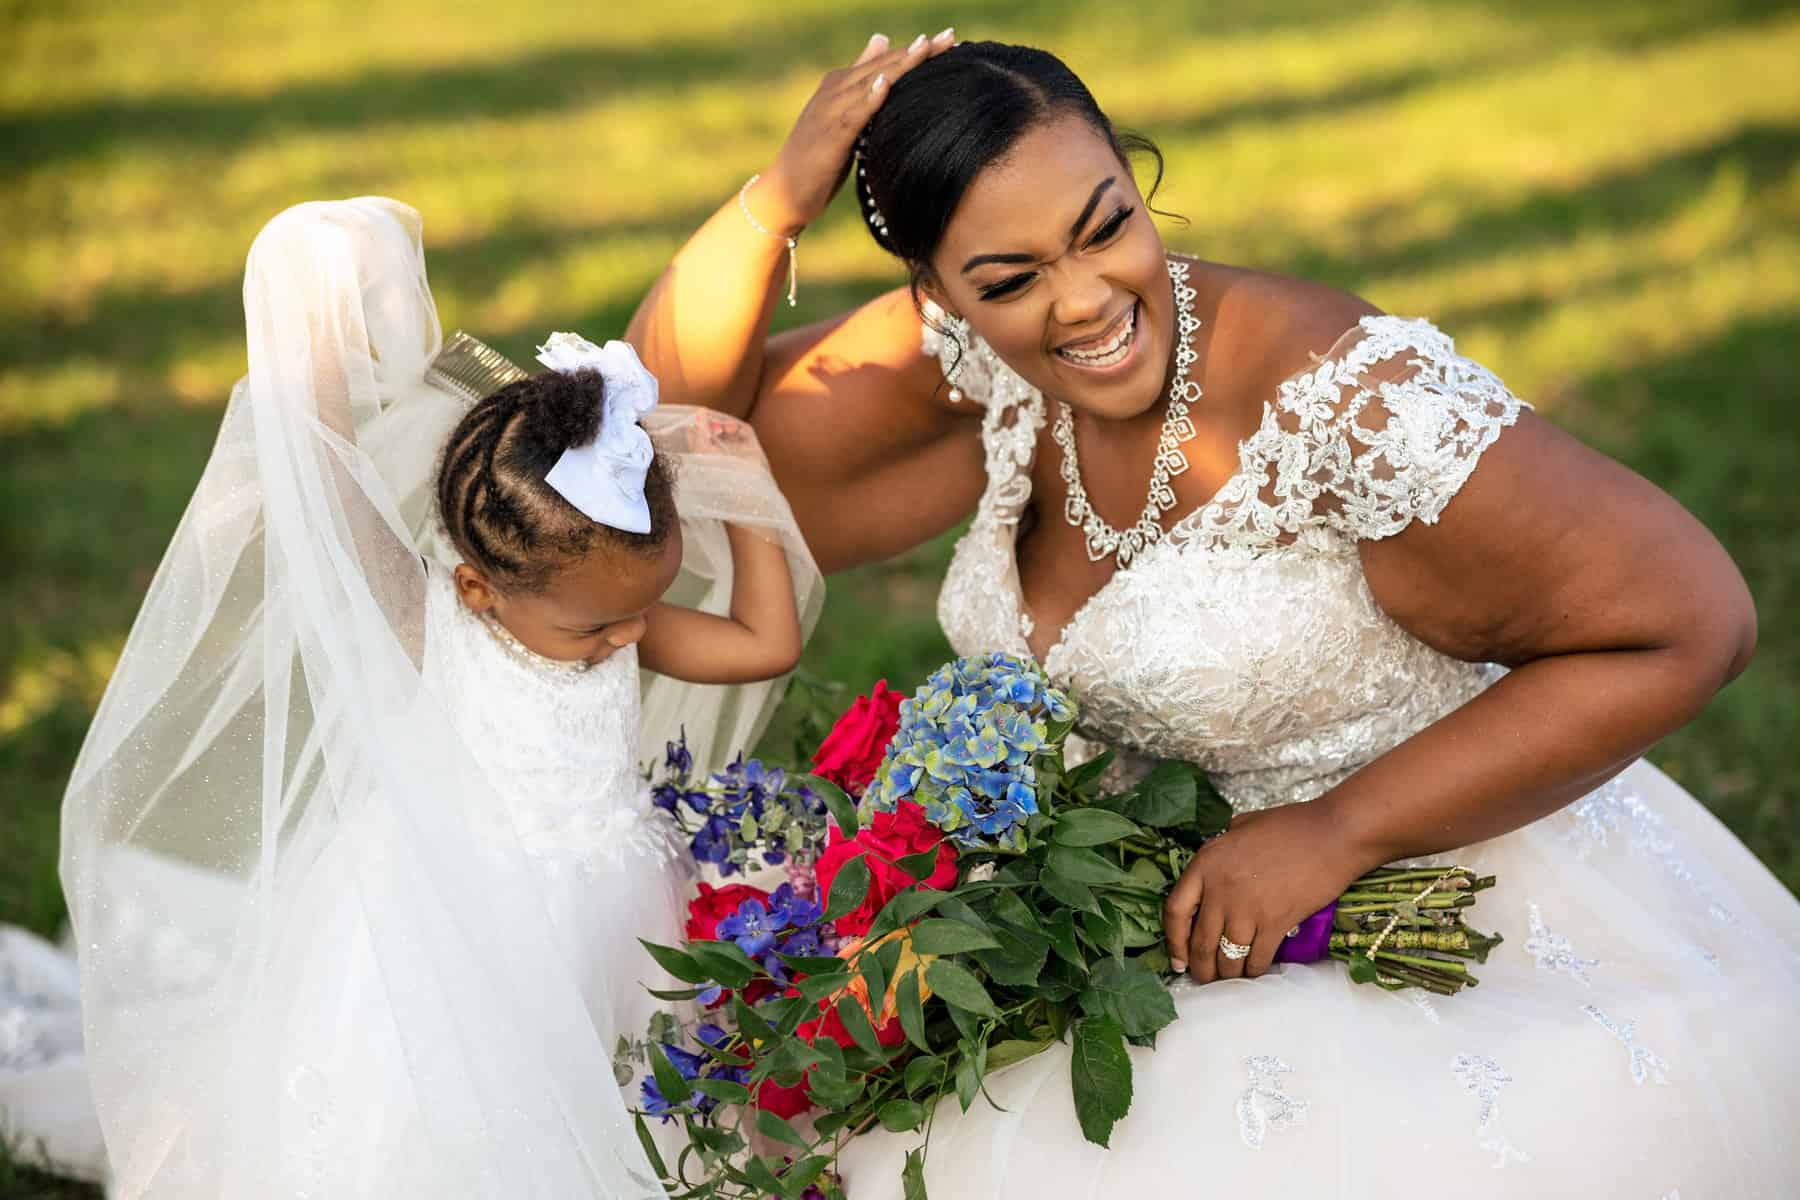 A bride and her daughter in a field.